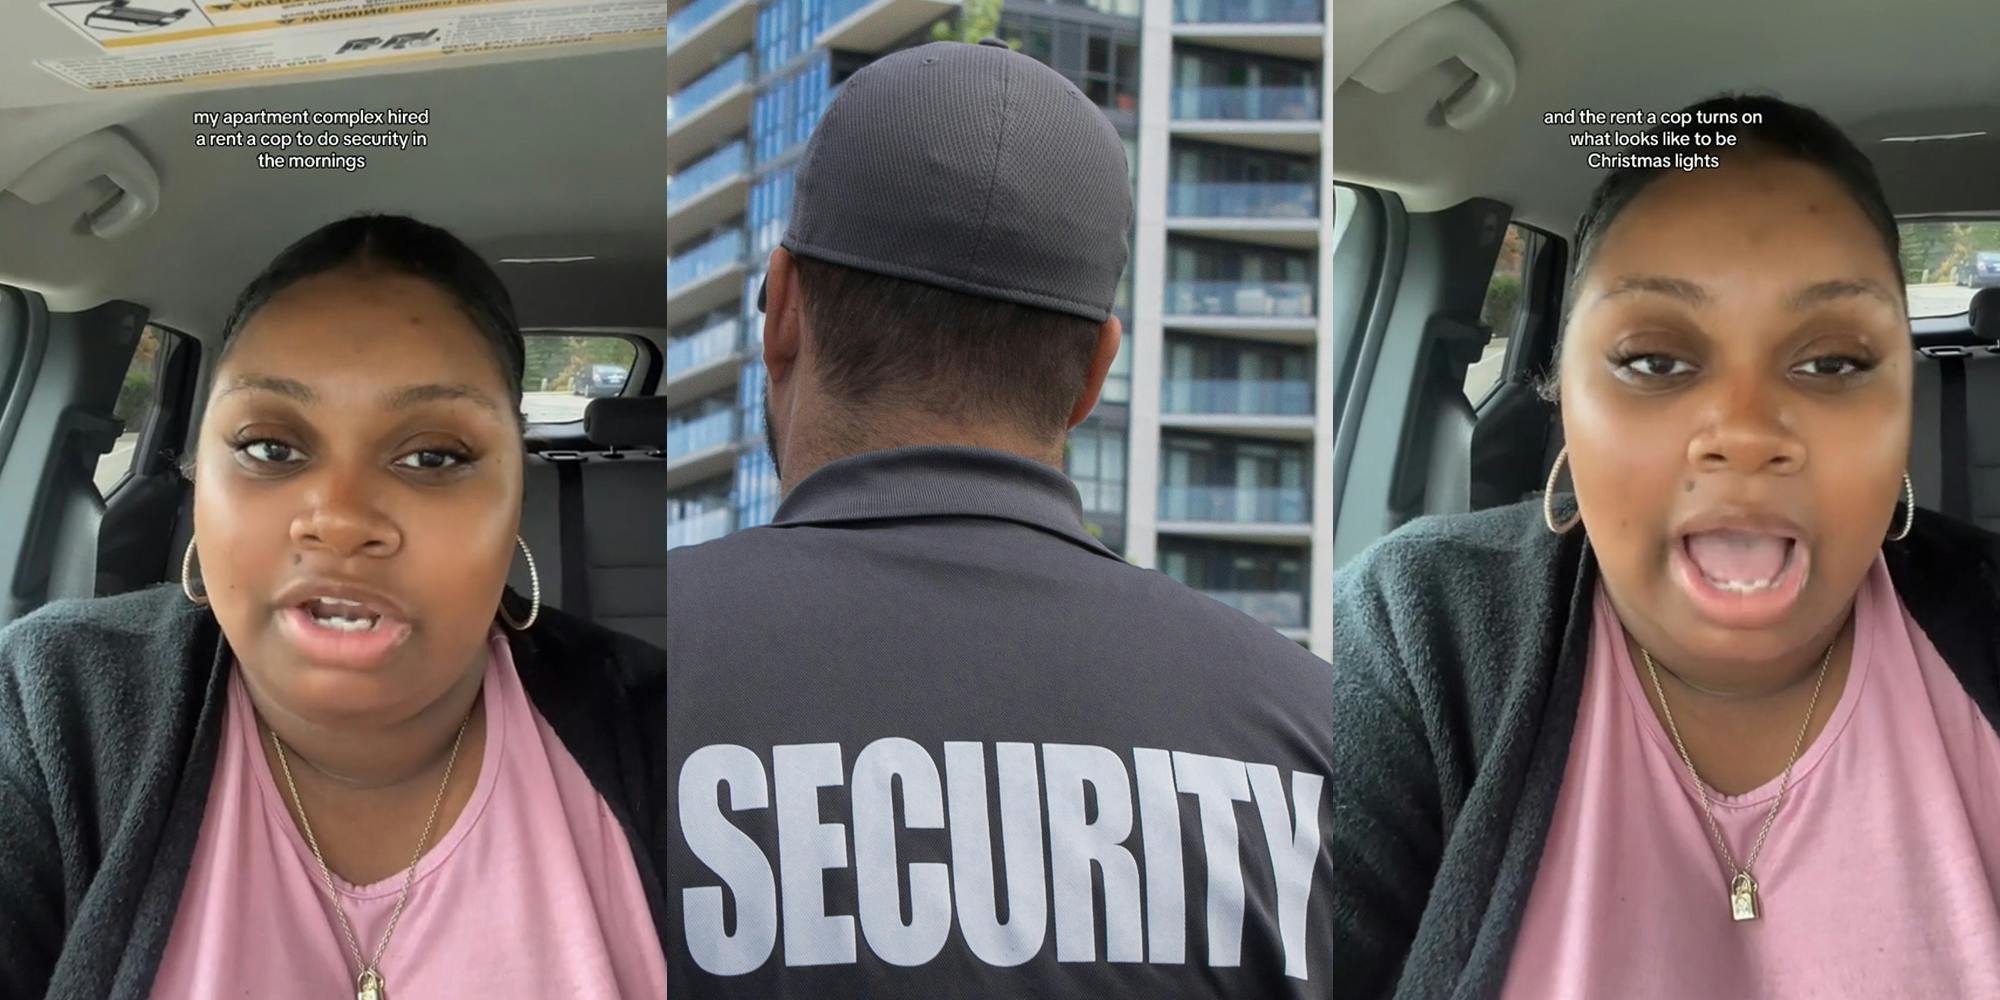 woman speaking in car with caption "my apartment complex hired a rent a cop to do security in the mornings" (l) apartment security guard (c) woman speaking in car with caption "and the rent a cop turns on what looks like to be Christmas lights" (r)